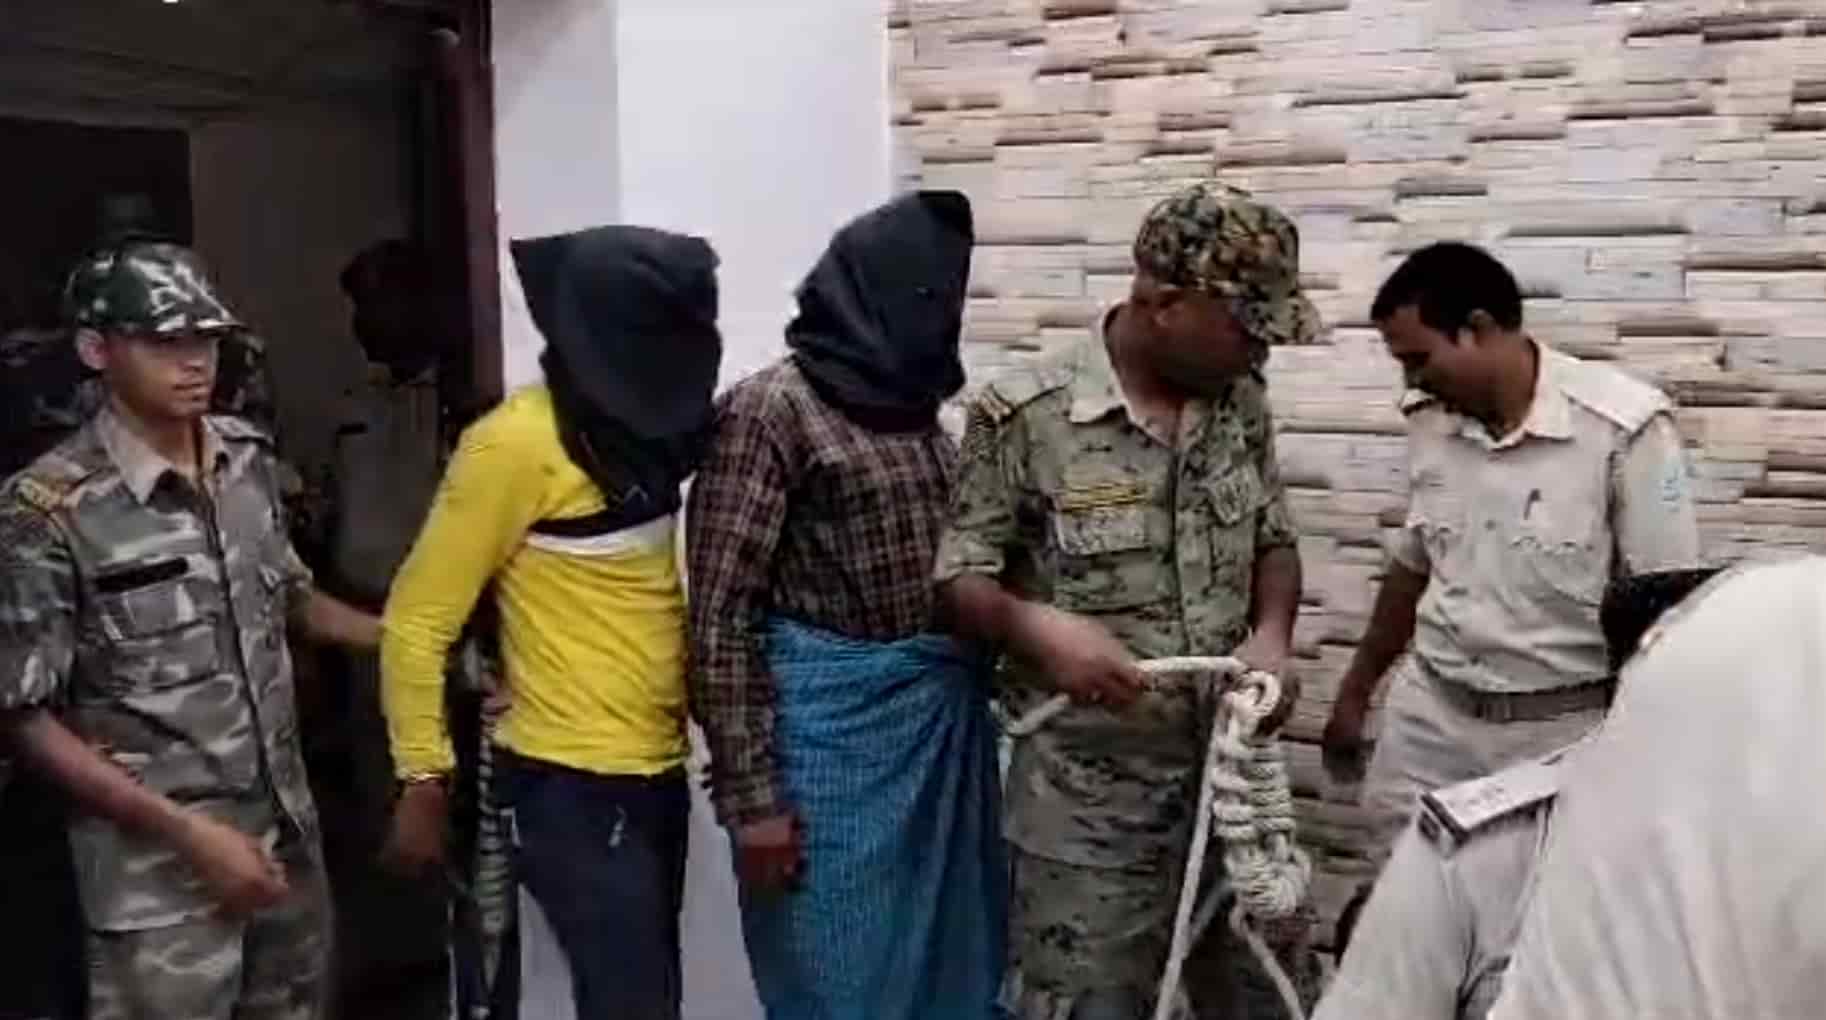 Four individuals, including a woman, have been arrested by the police for allegedly murdering a man over a suspected extramarital affair. The victim's body was discovered on June 7, with hands bound, in Meghasai under Potka police station, East Singhbhum.